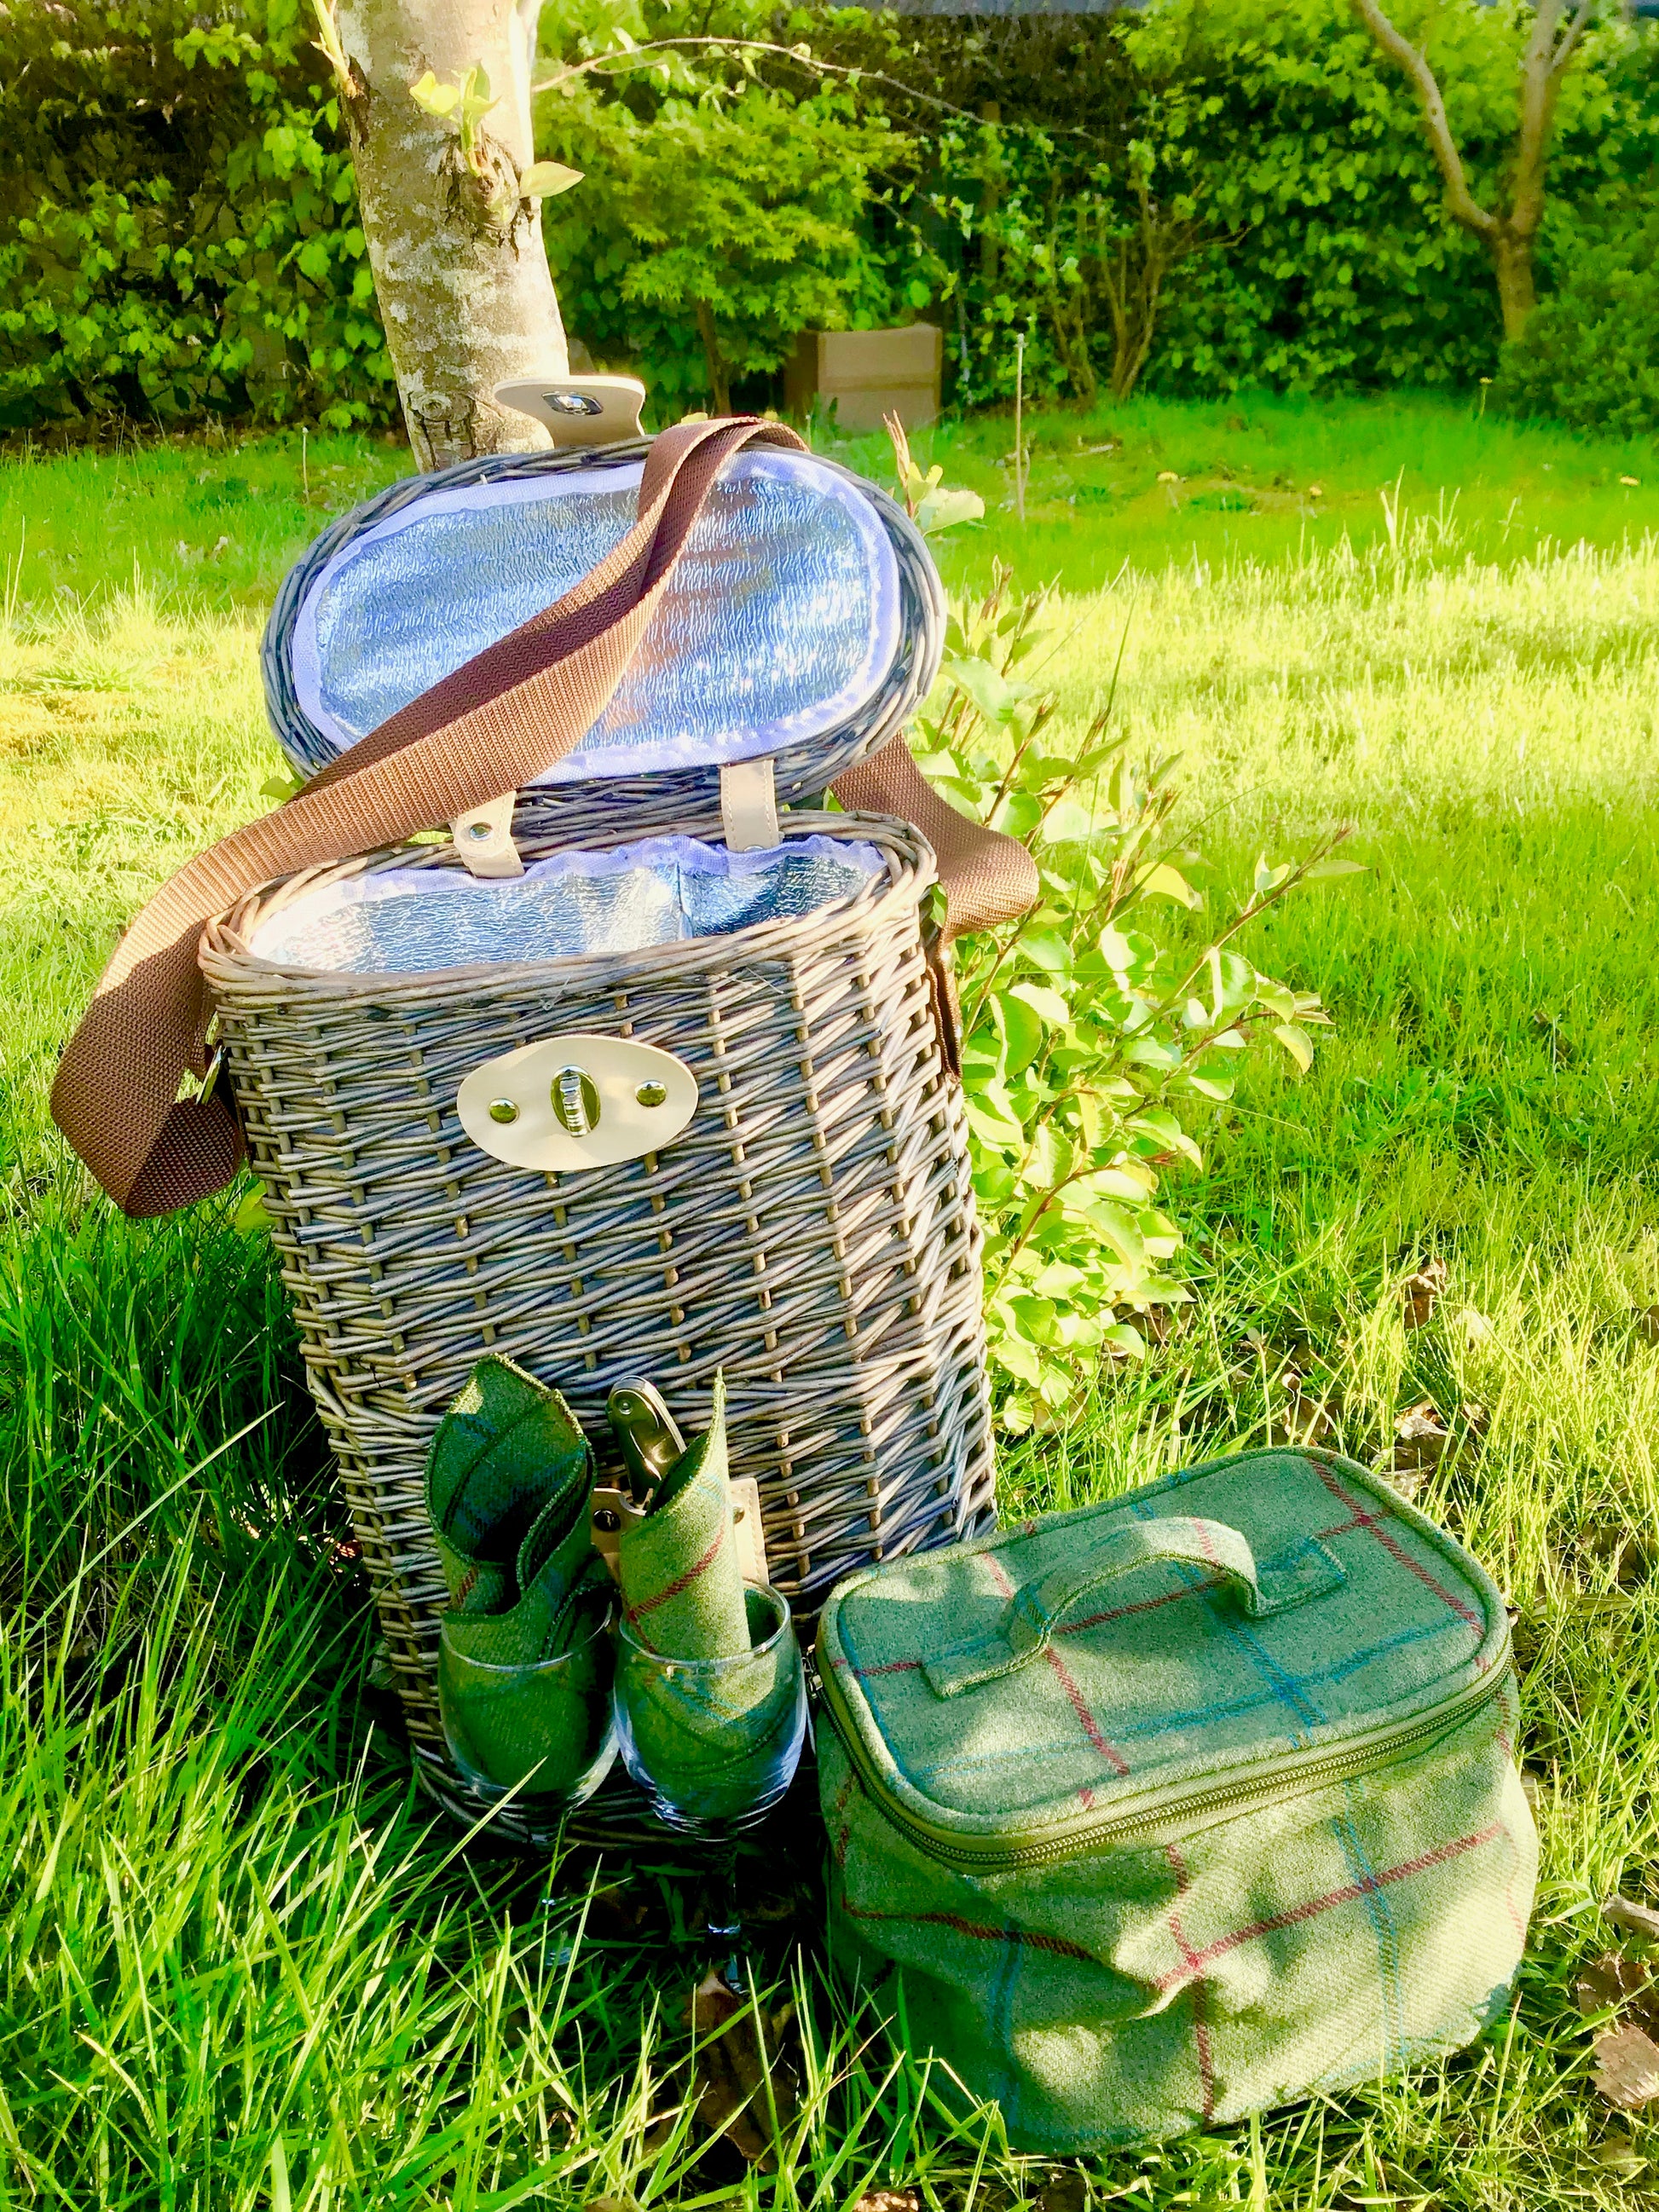 The Dartmoor willow bottle- basket with glasses and shoulder strap and cooler bag